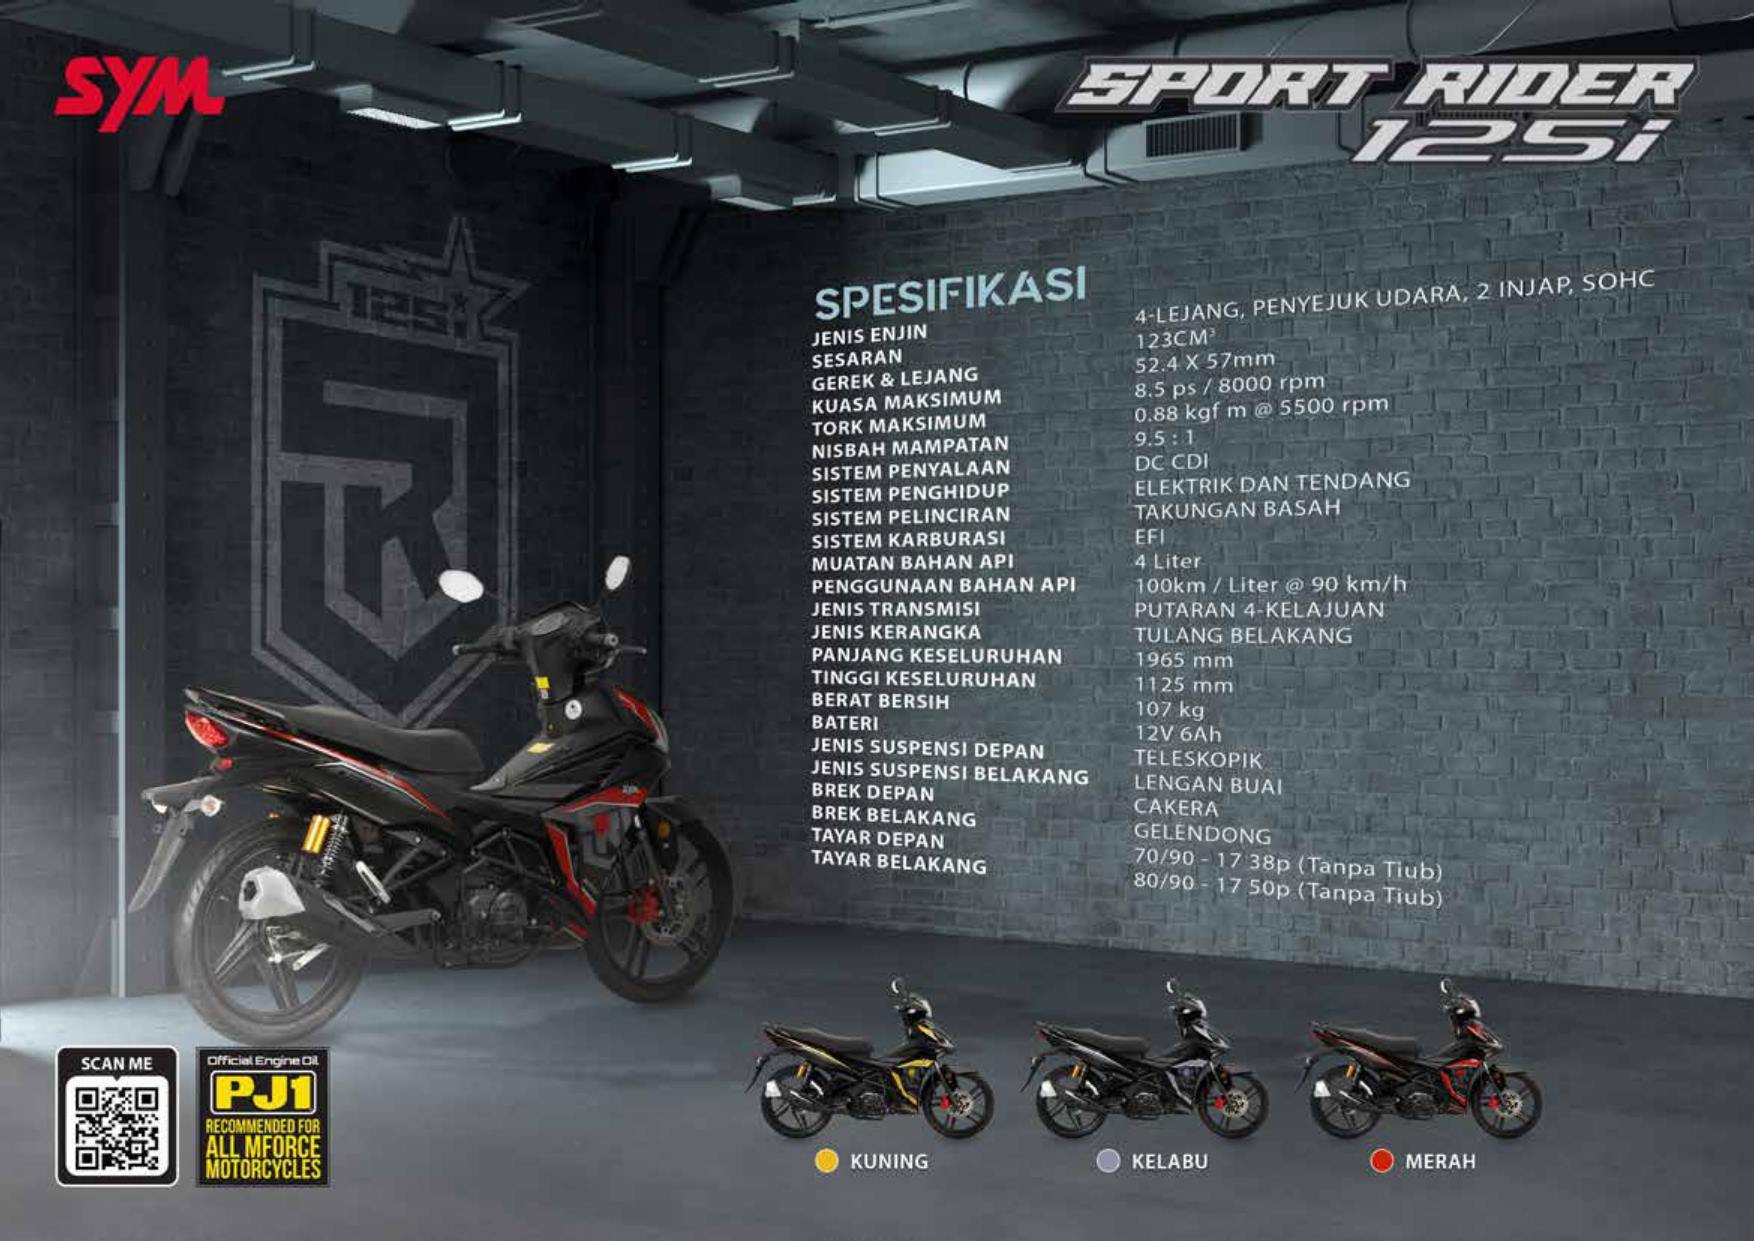 Download-BrochureSportRider125iN2-SportRider125i-20220304153544_page-0002